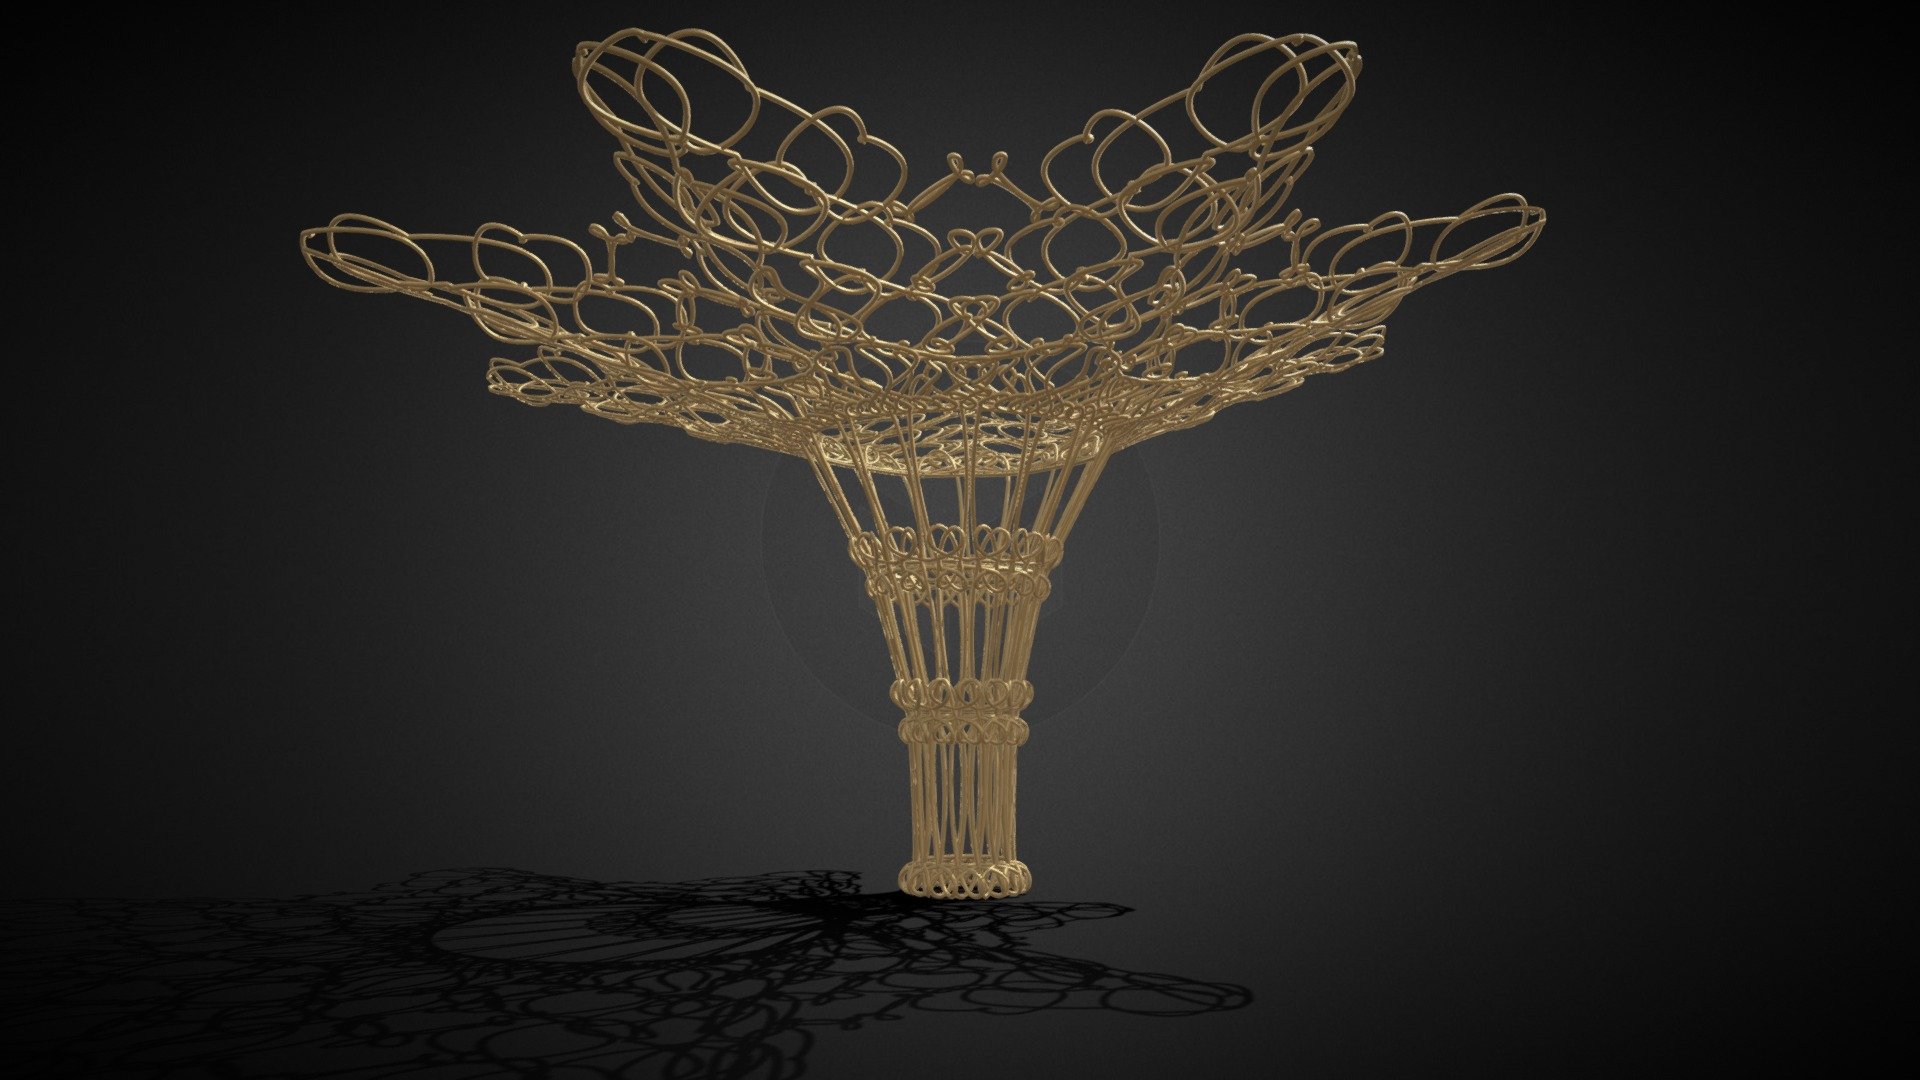 Decorative Canopy Extruded Curved Wired Metal 001 - made with Geometry Nodes in Blender 3.5Alpha
Procedurally generated UVs available on demand 3d model